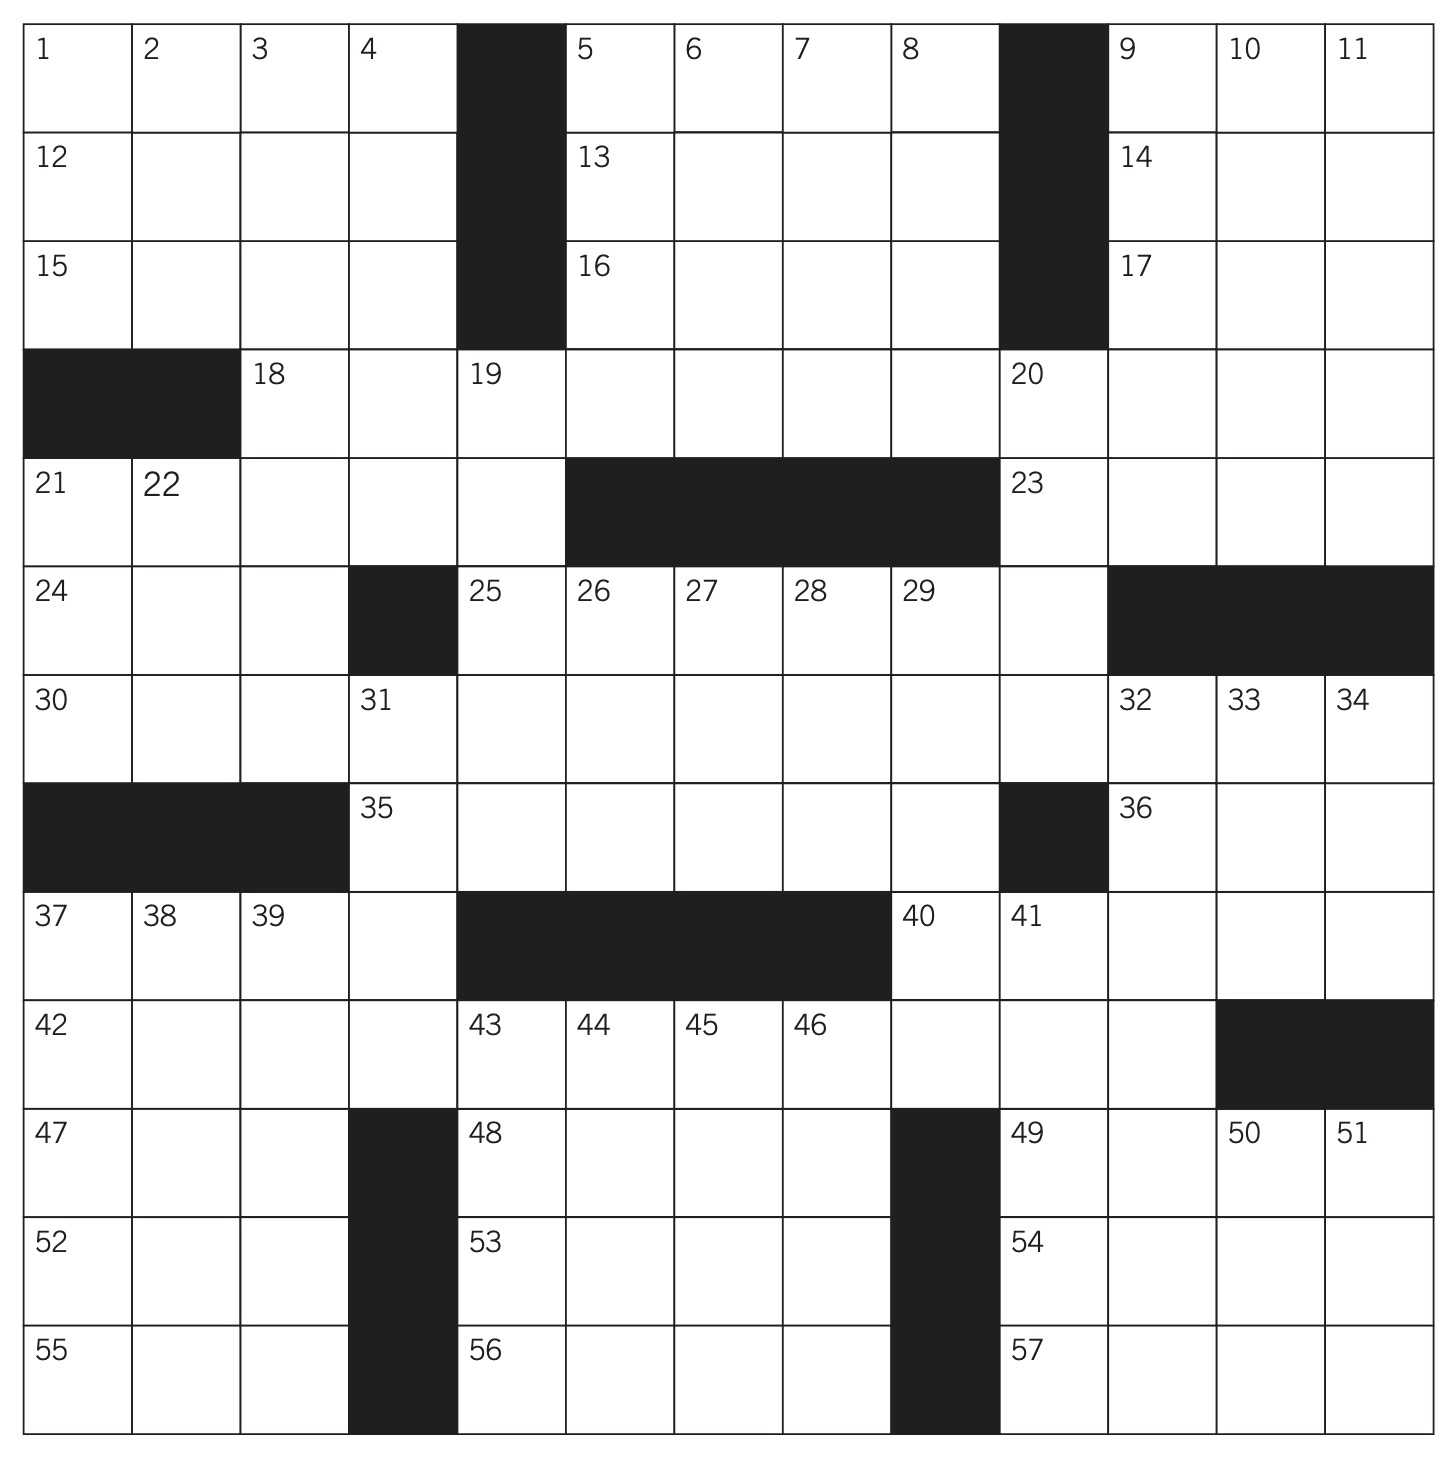 March 2020 Crossword Puzzle Answers: #39 Shop Therapy #39 Capital Region